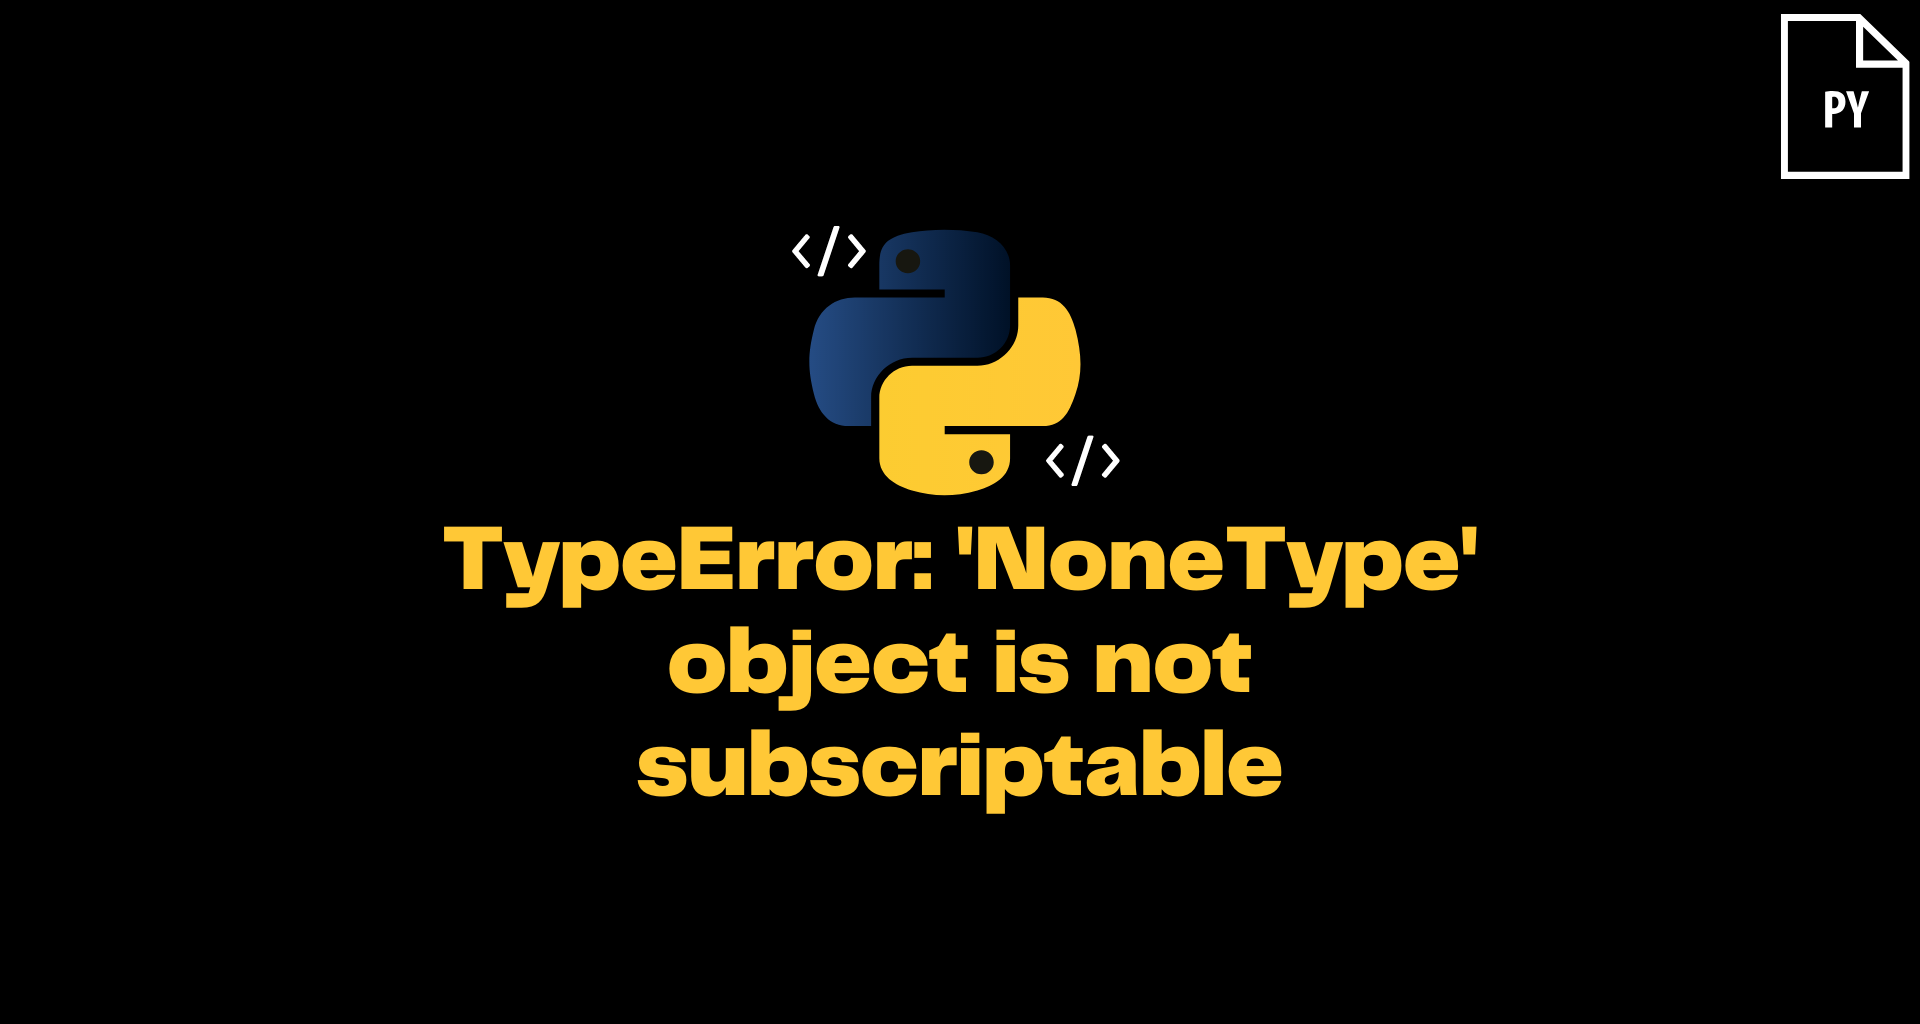 ItsMyCode: Python TypeError: ‘NoneType’ object is not subscriptable